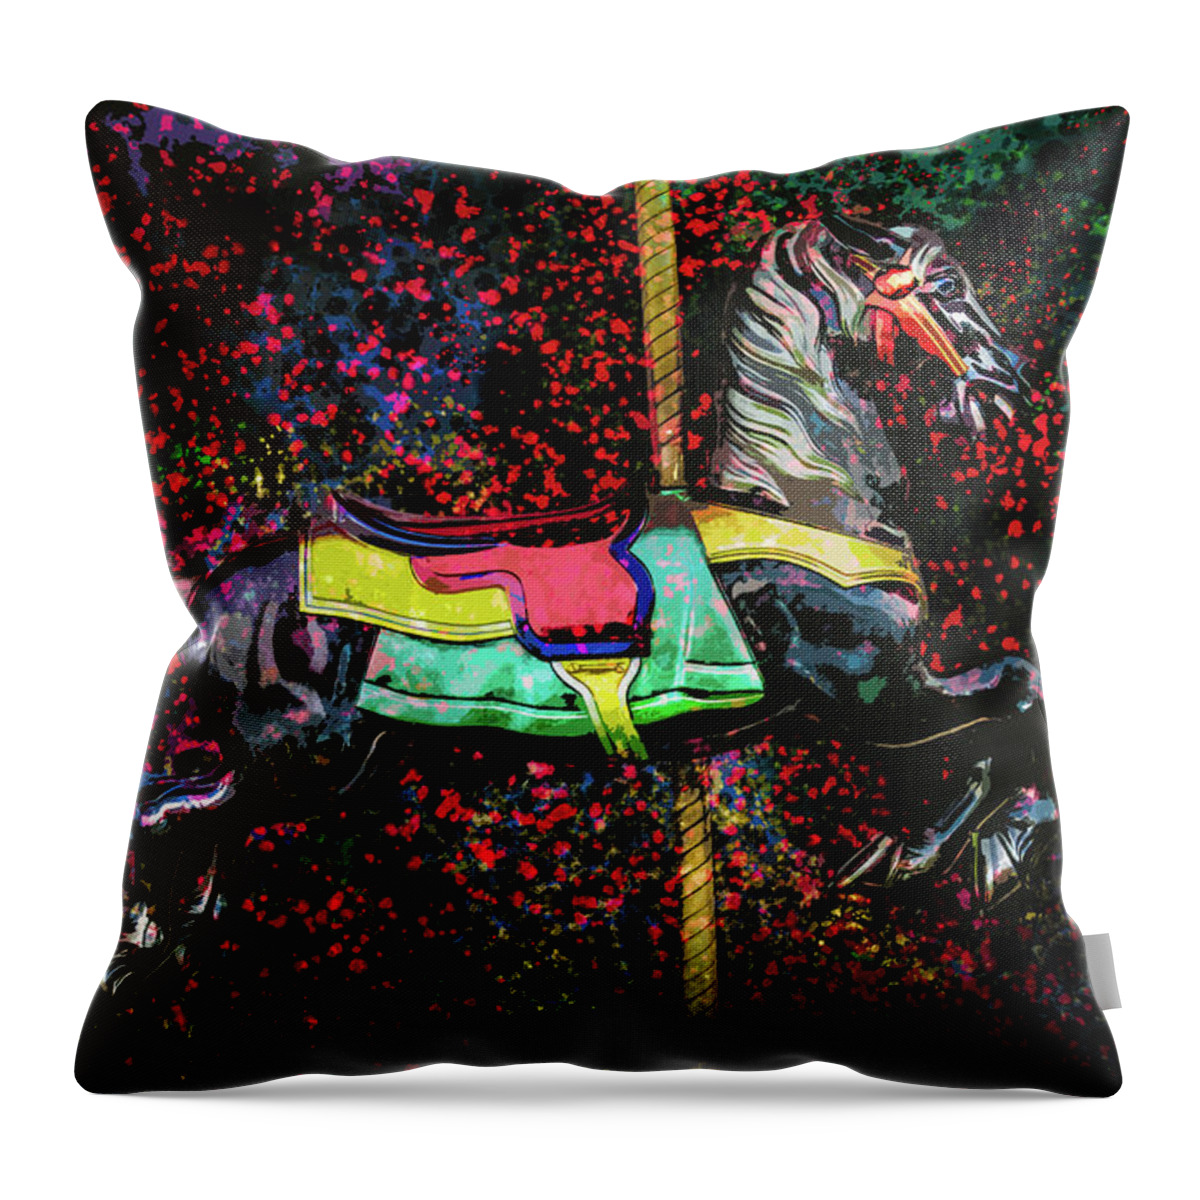 Carousel Throw Pillow featuring the photograph Carousel Number 16 by Michael Arend